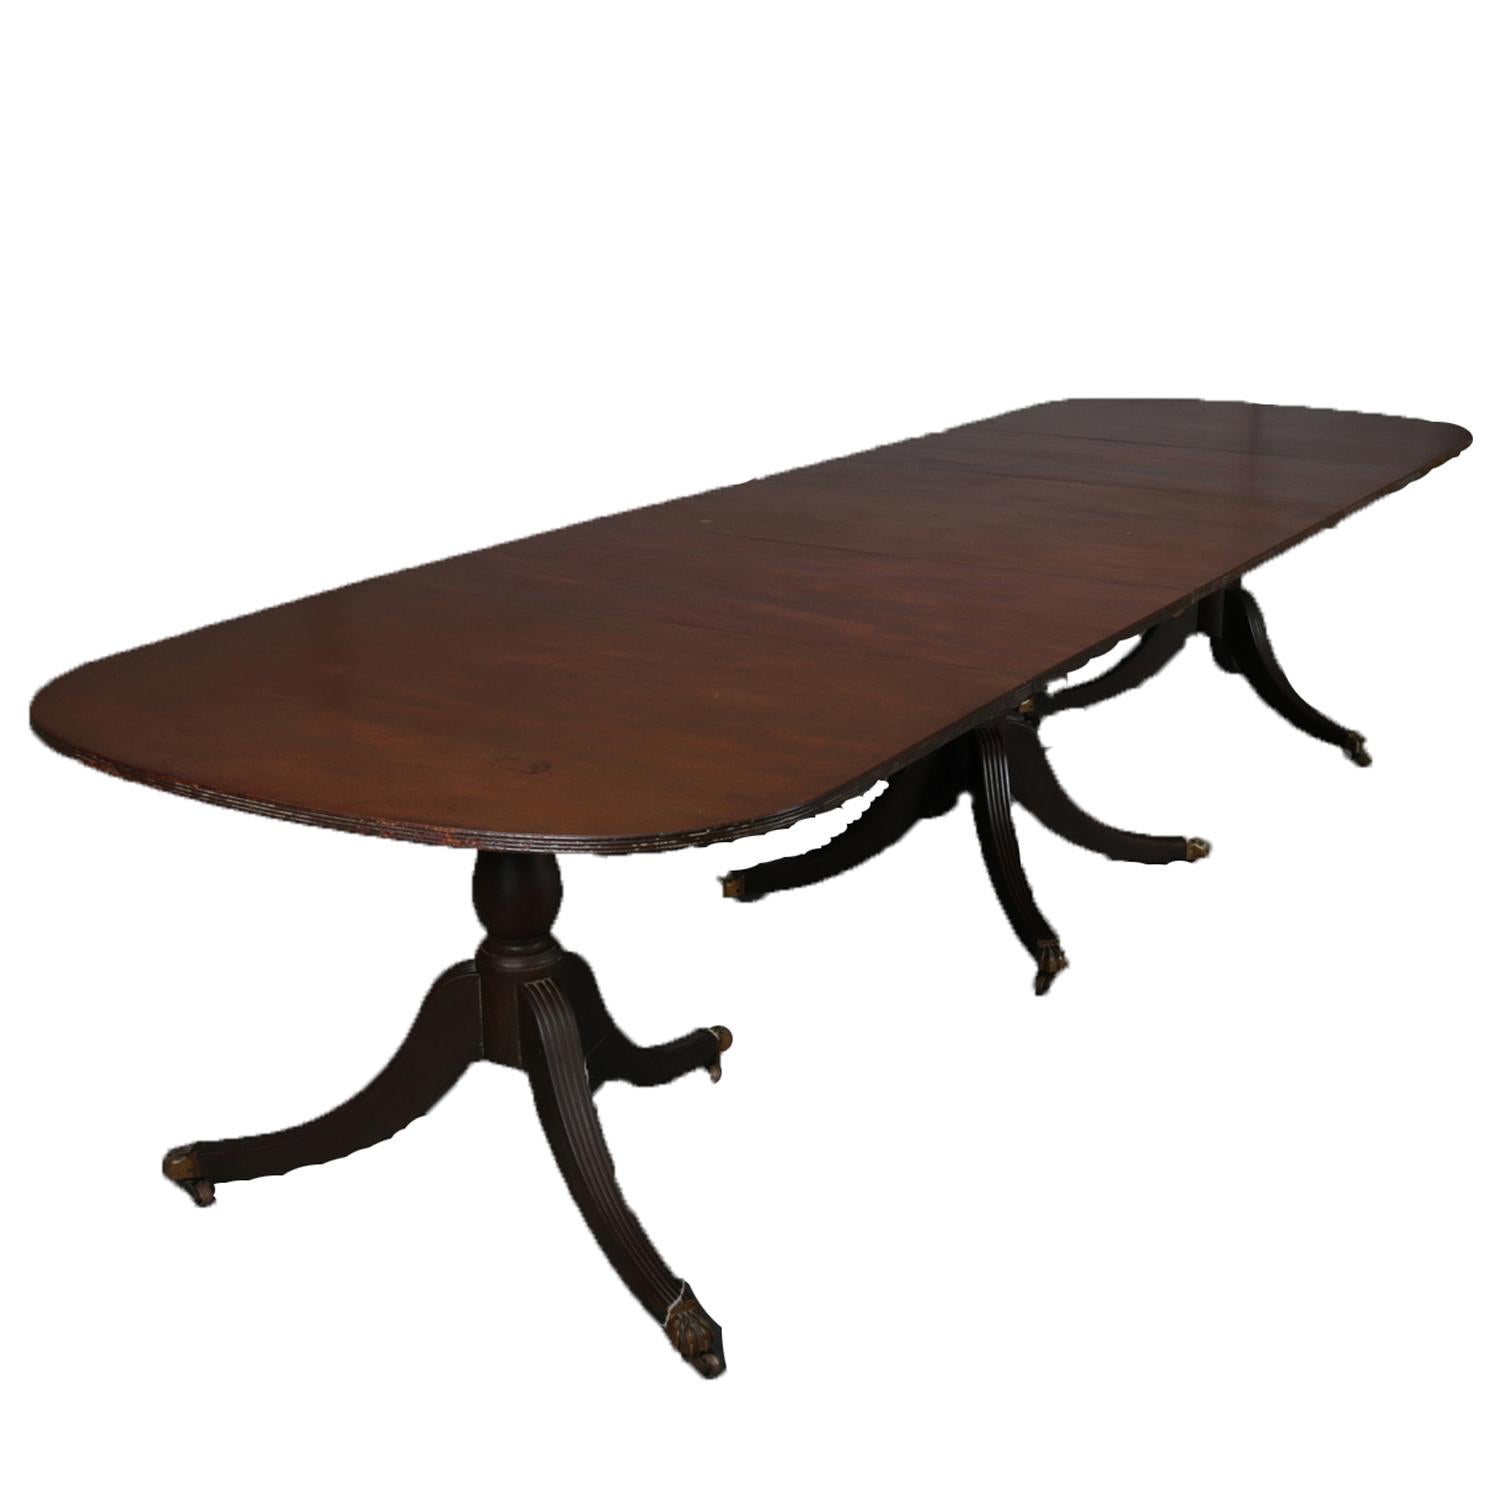 An antique Federal banquet table features mahogany construction, is raised on three pedestals each having reeded convex tripod legs terminating in bronze caps with casters, and has two leaves, circa 1890.


Measures: 30